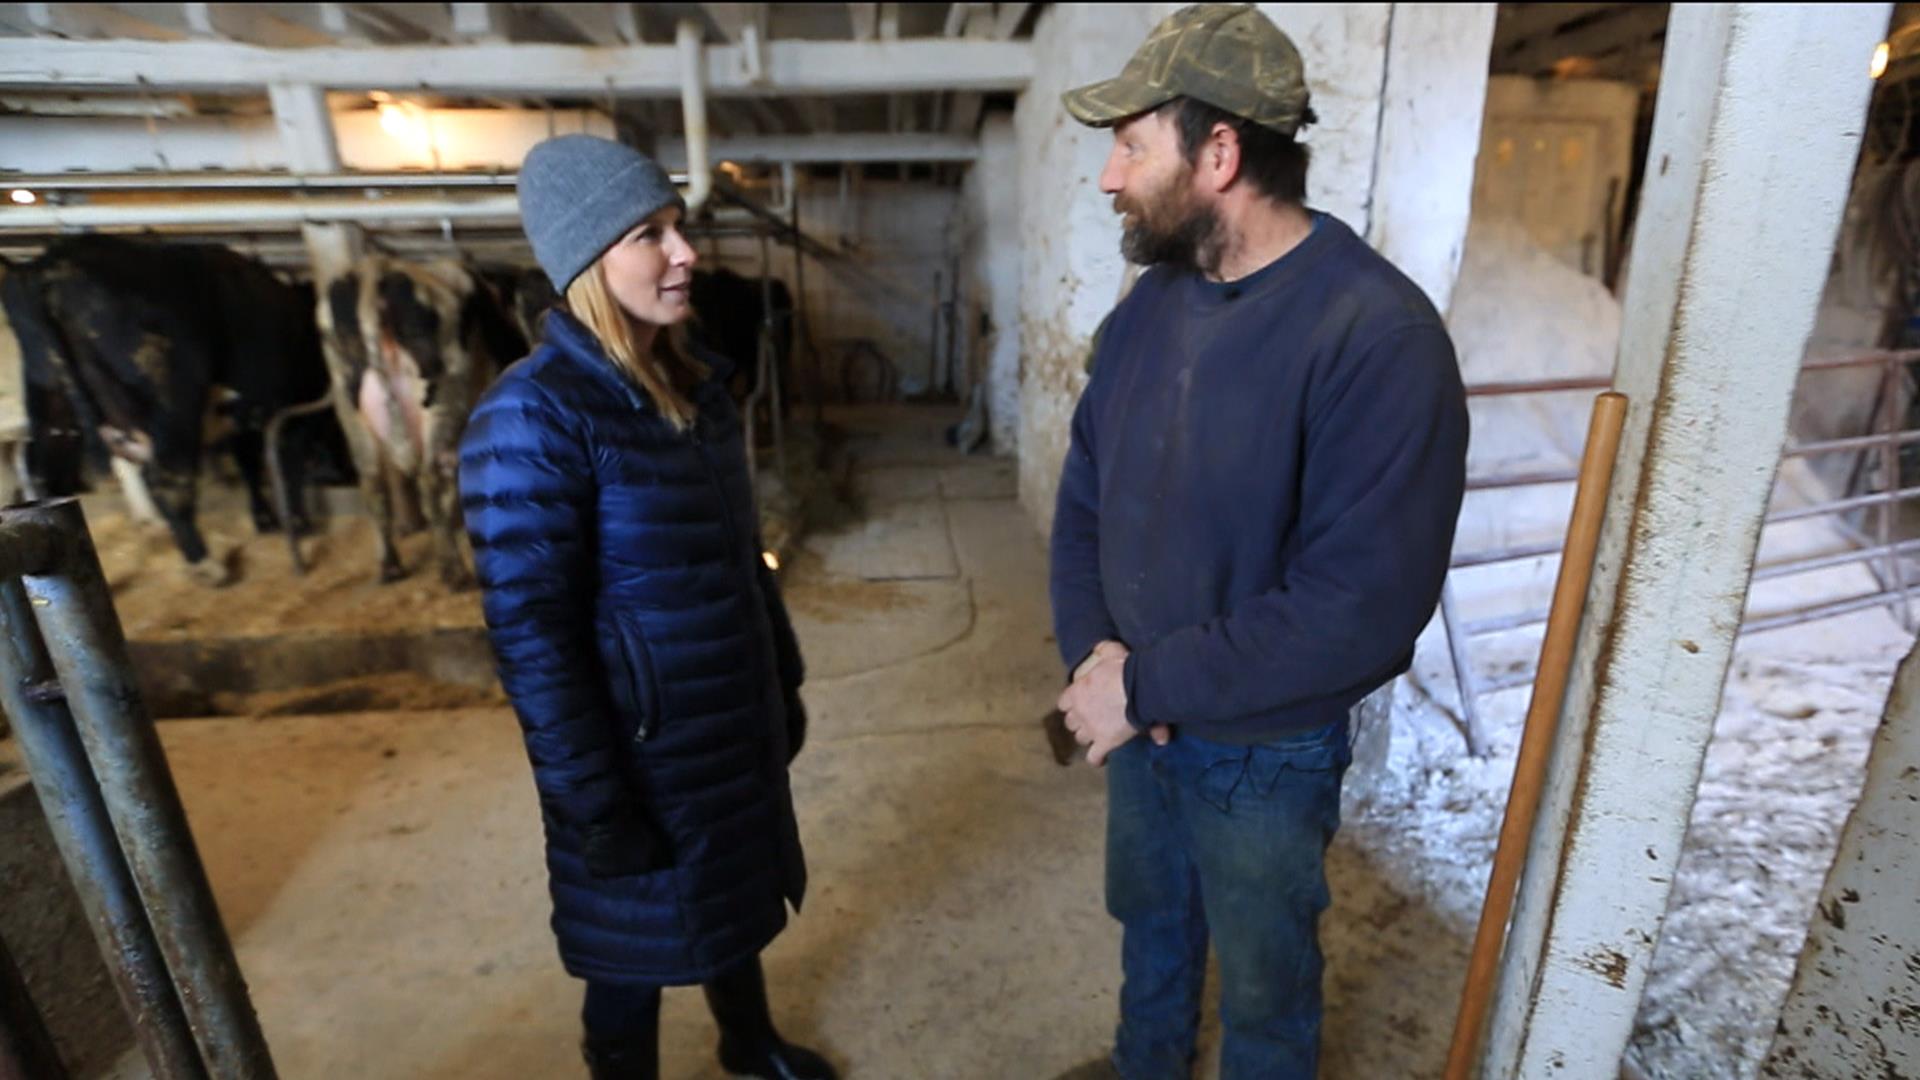 In Trump they trust: Wisconsin farmer reveals why he abandoned Democrats